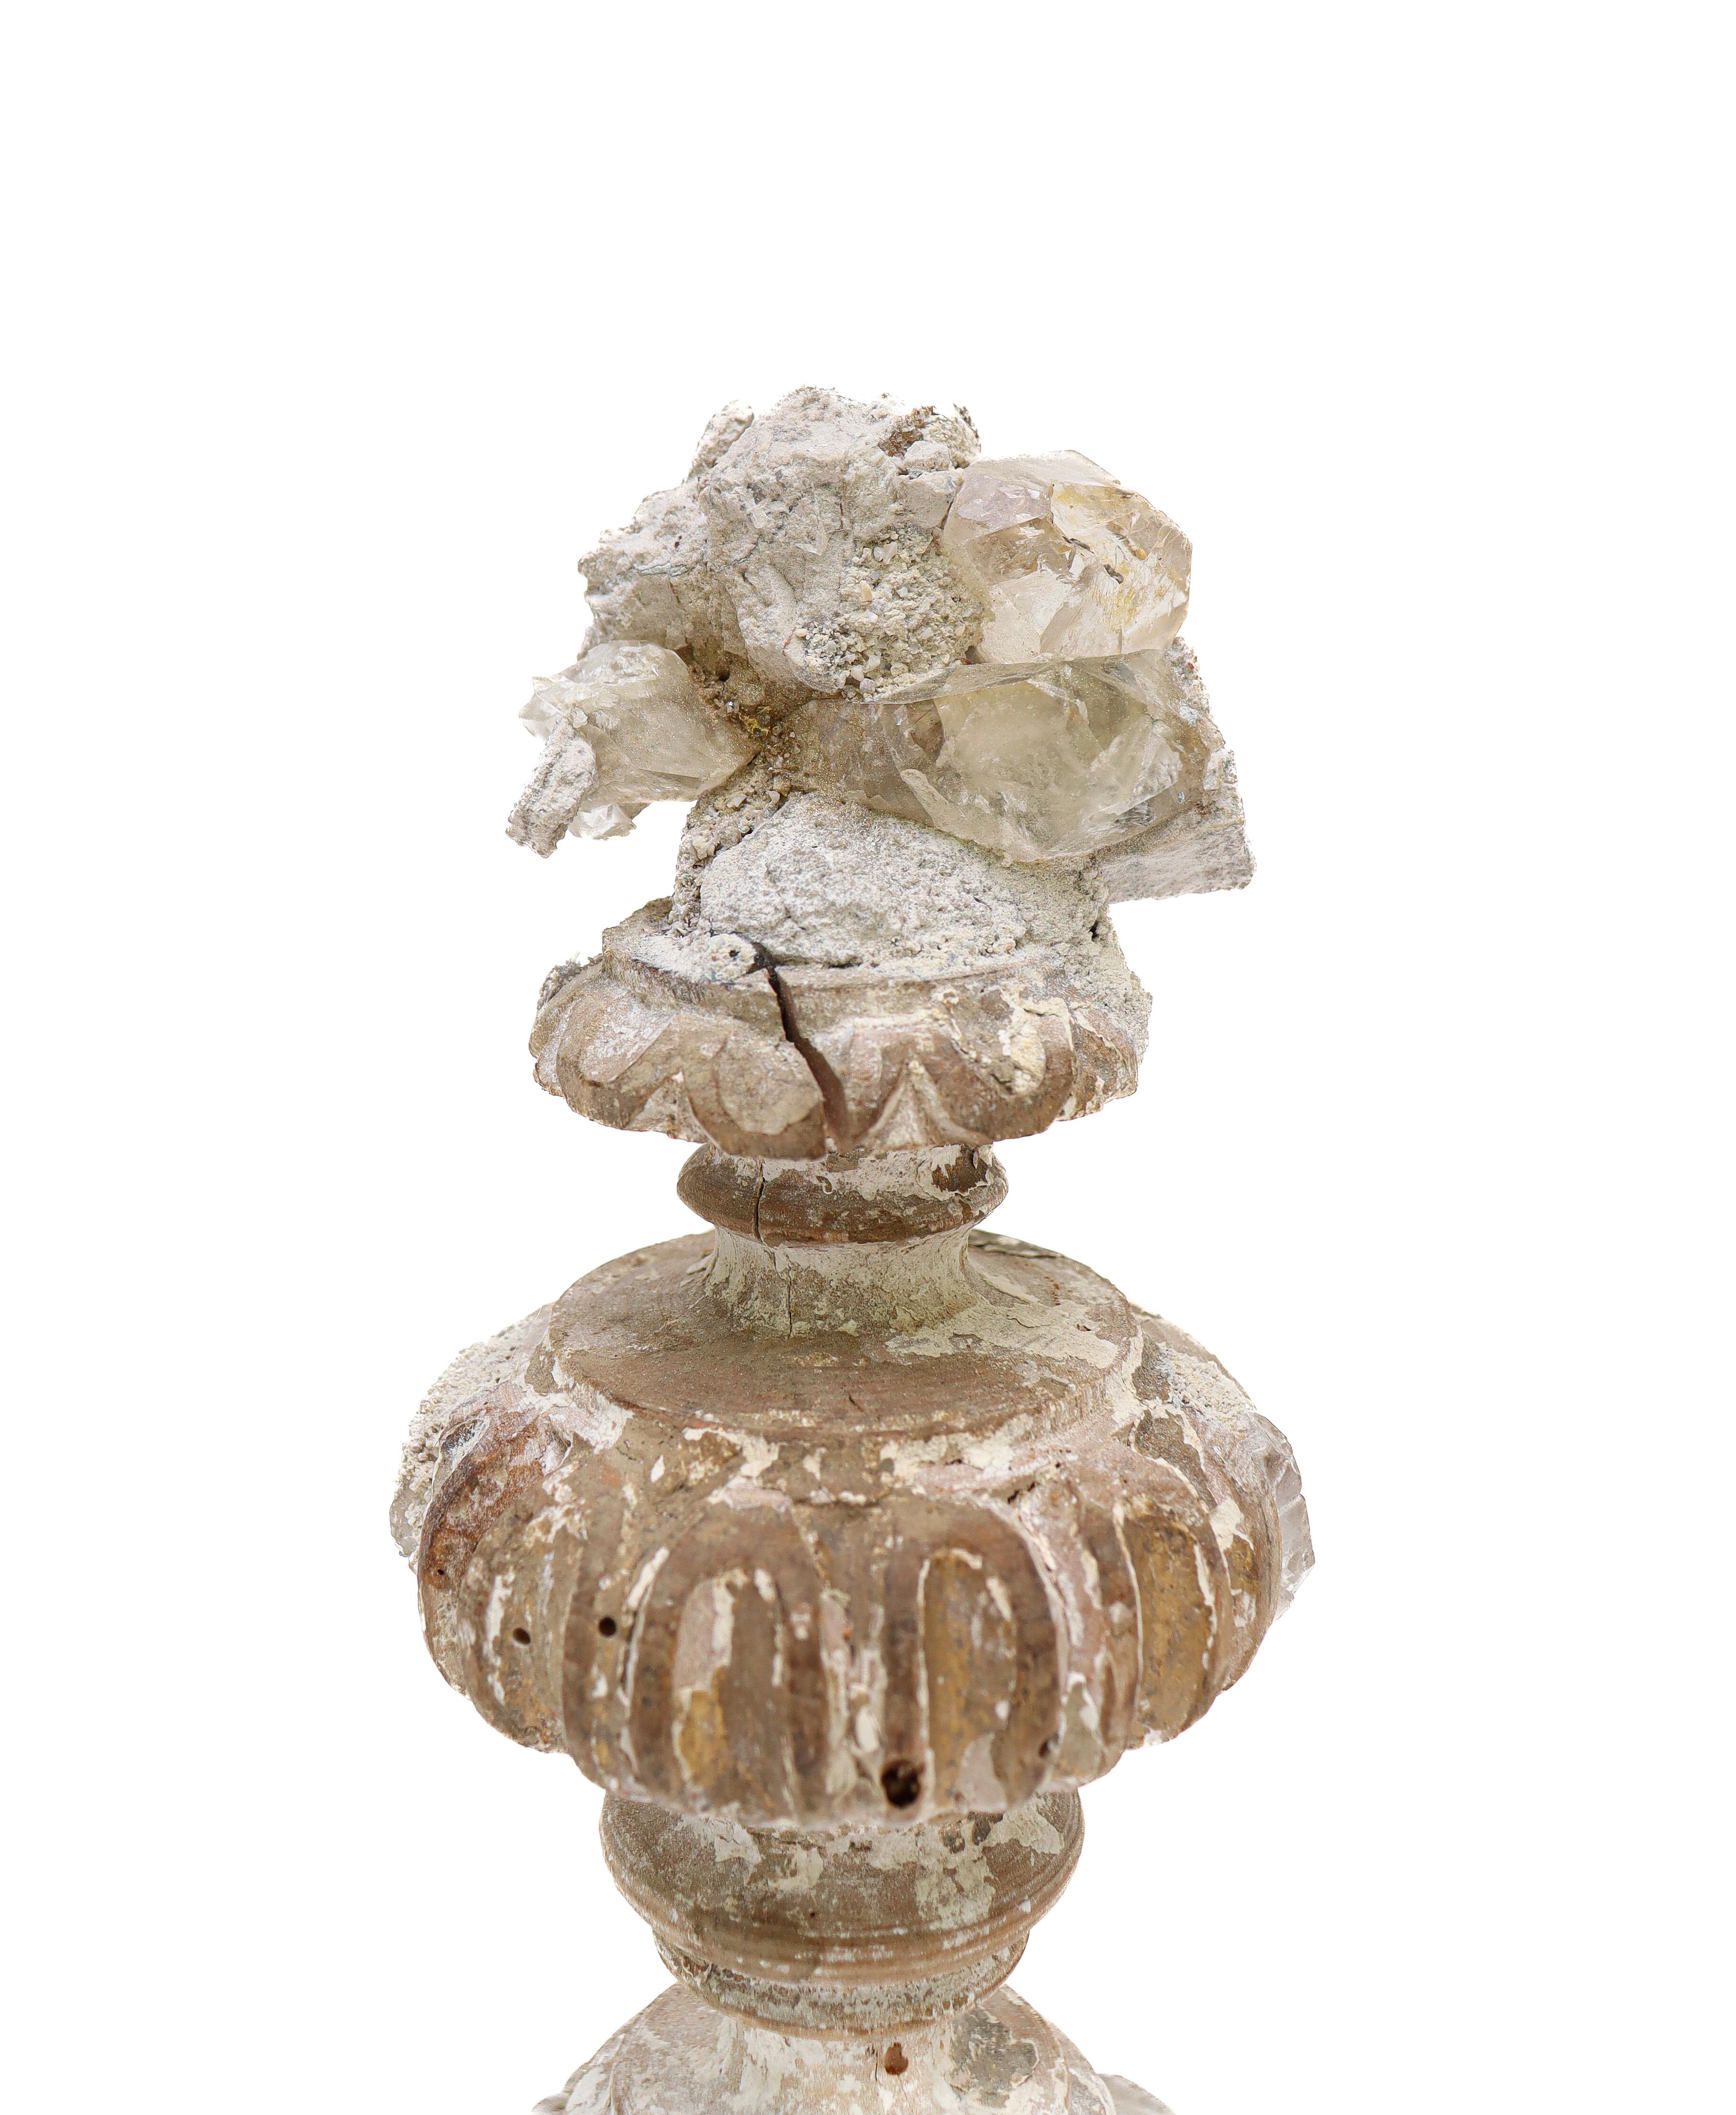 17th Century Italian Fragments 'Group of Three' with Calcite Crystals on Bobeche 1